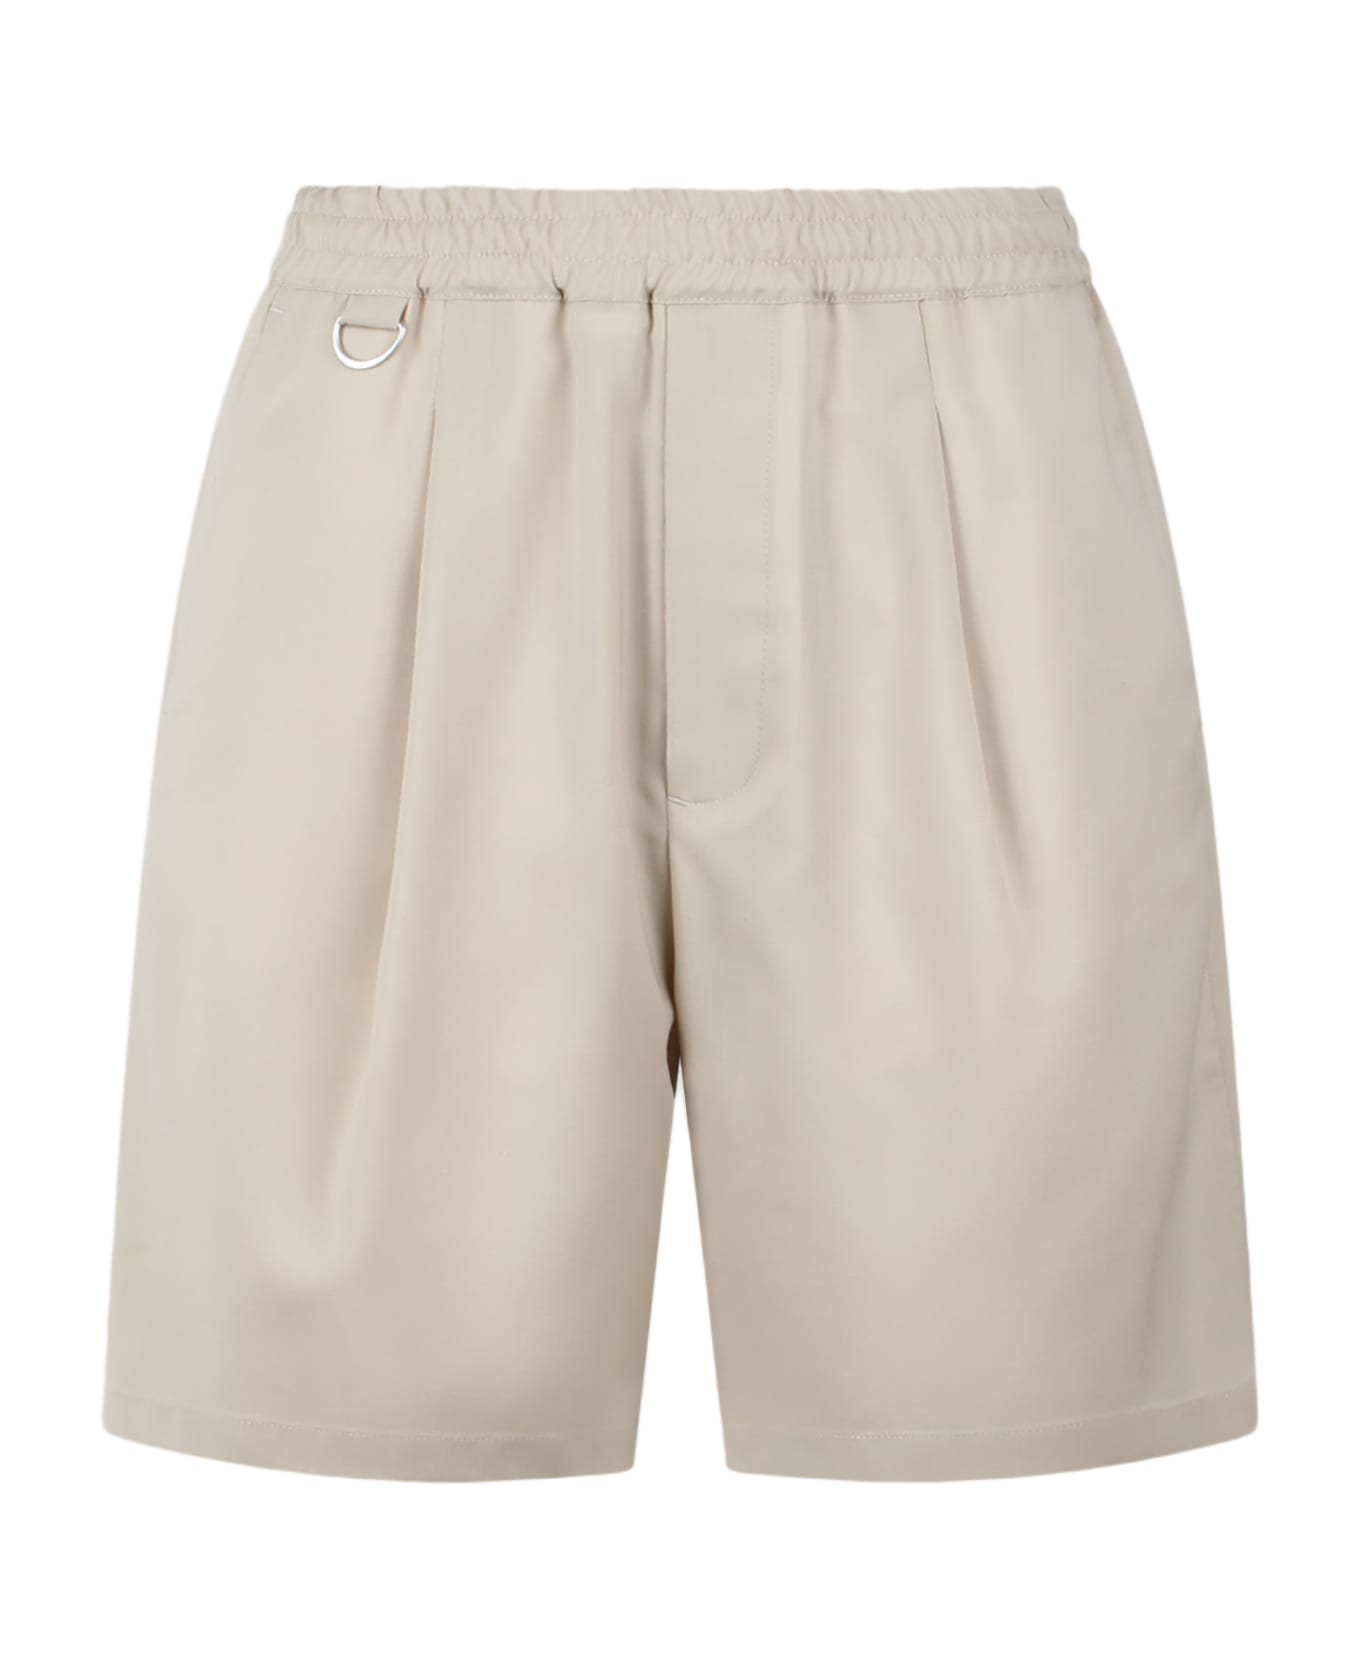 Low Brand Tropical Wool Shorts - Nude & Neutrals